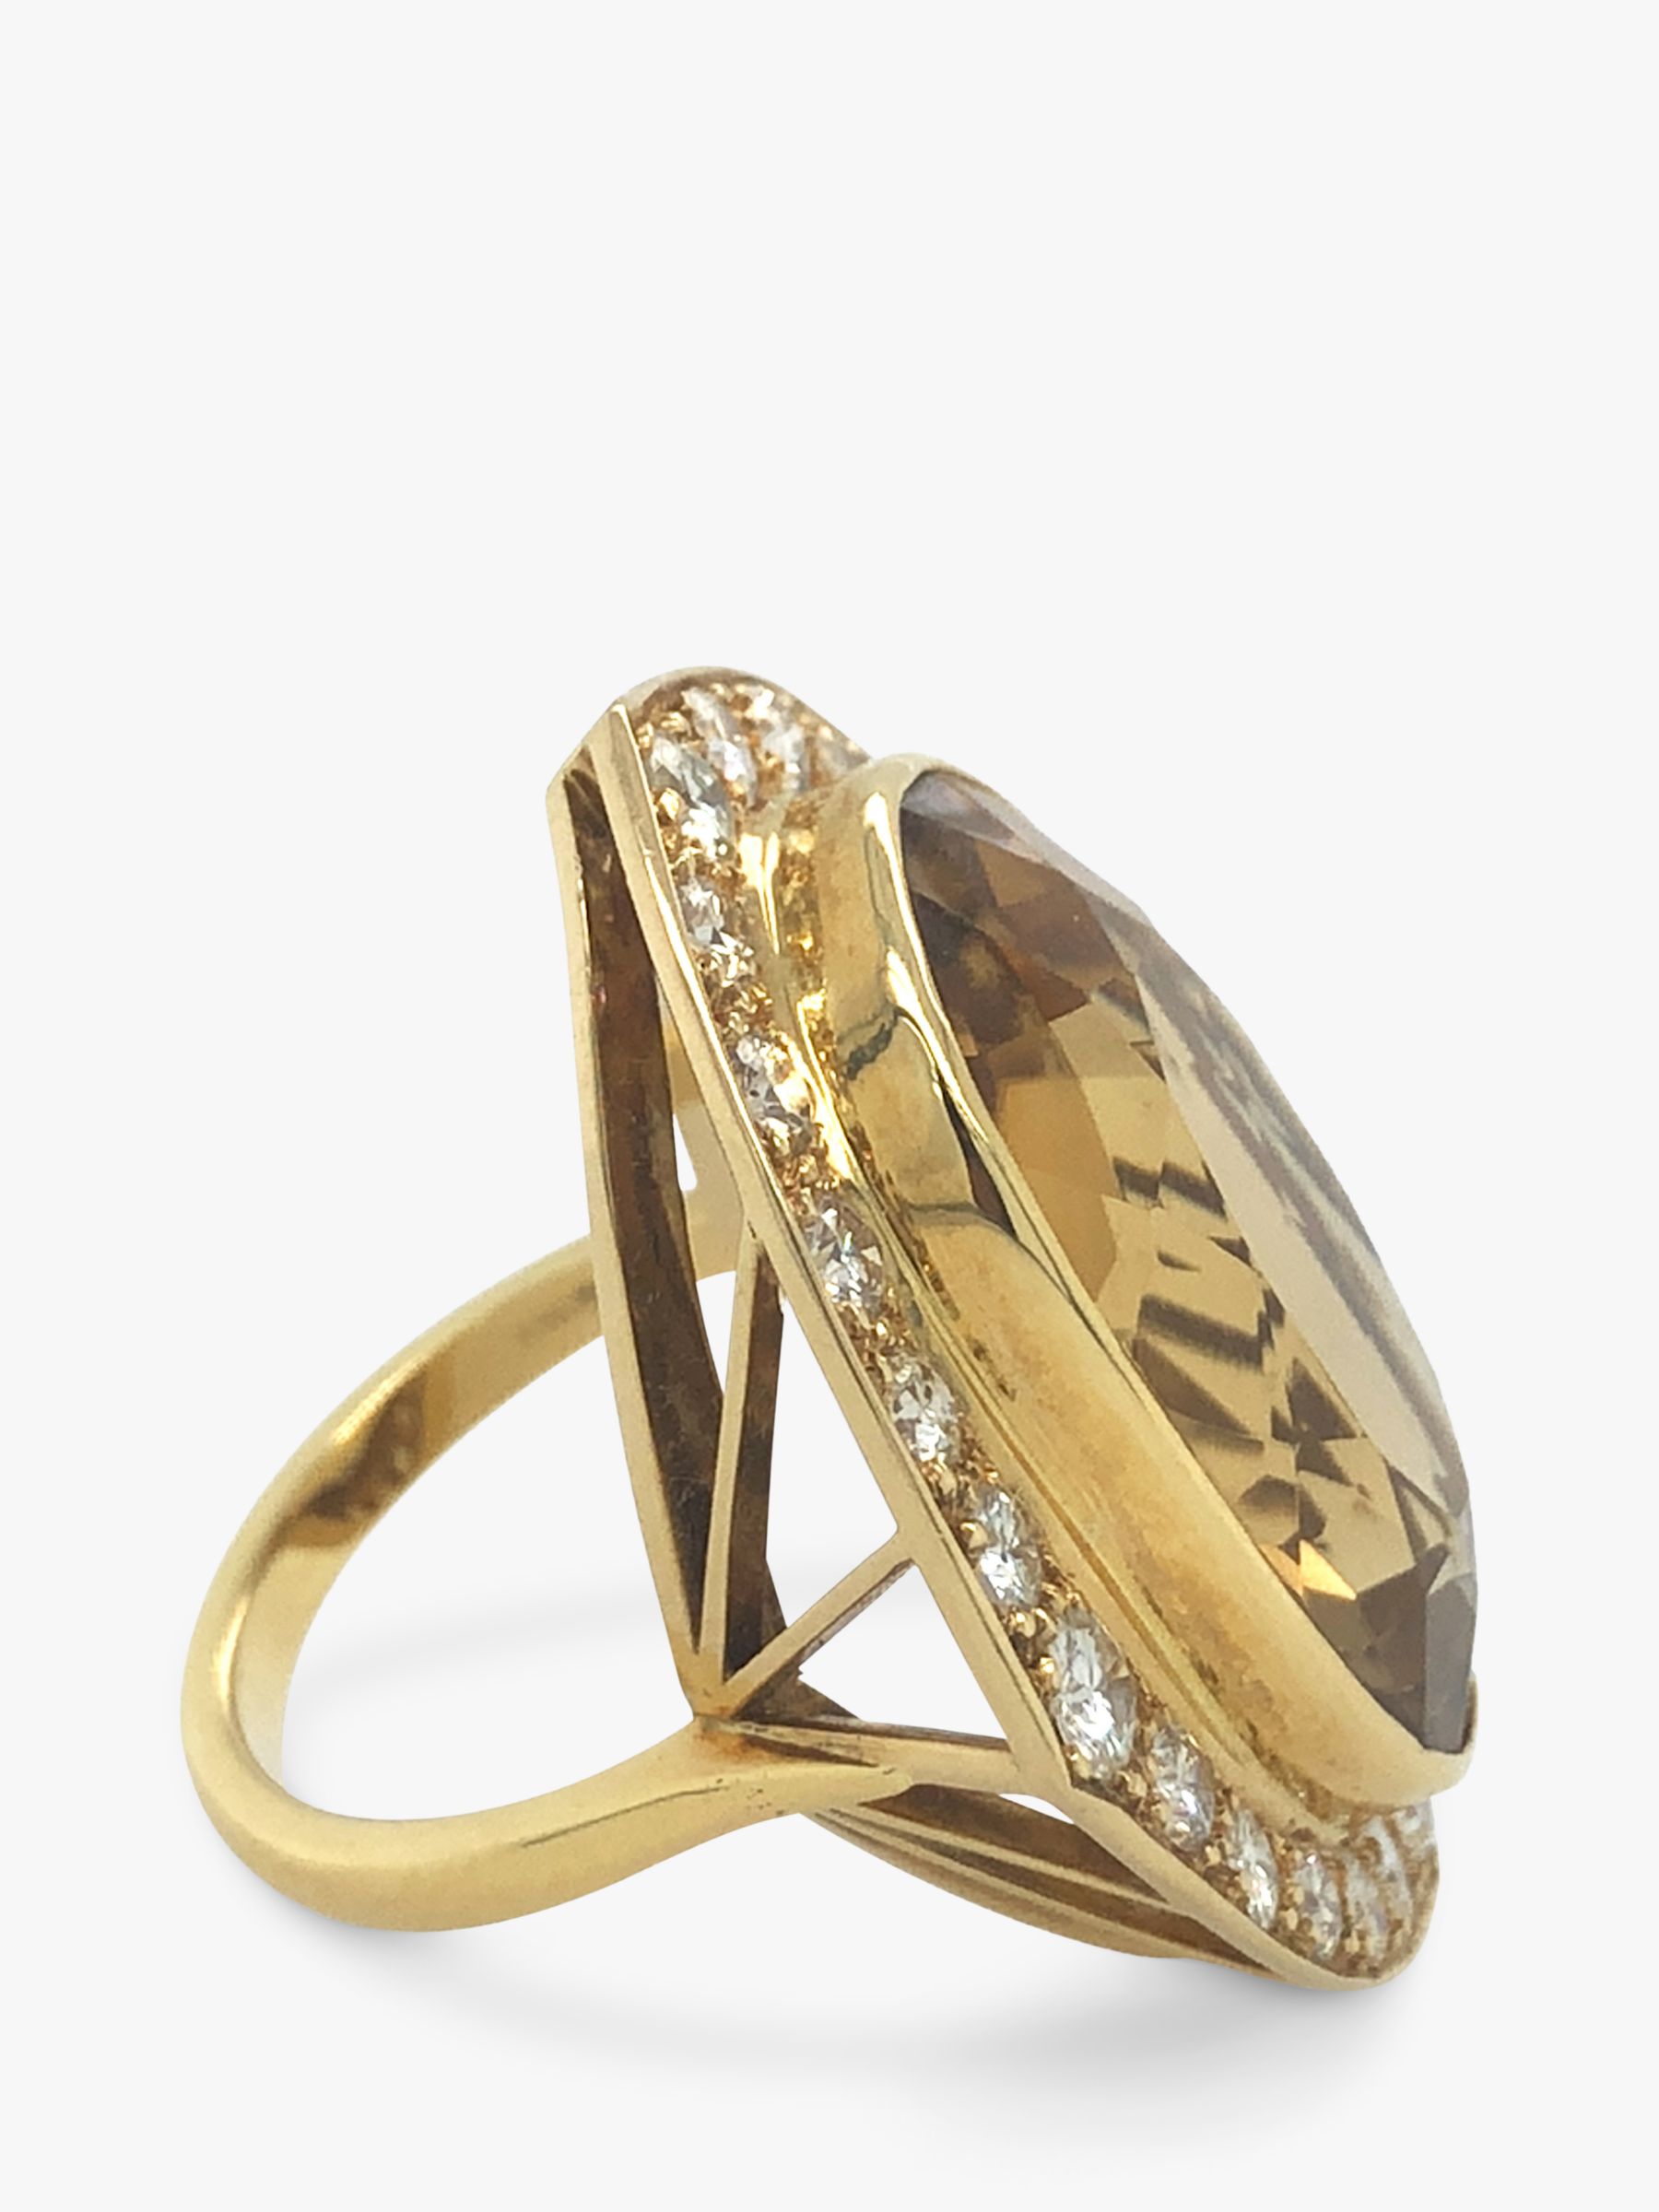 Vintage Fine Jewellery Second Hand 18ct Yellow Gold Diamond & Oval Citrine Ring, Dated Circa 1960s